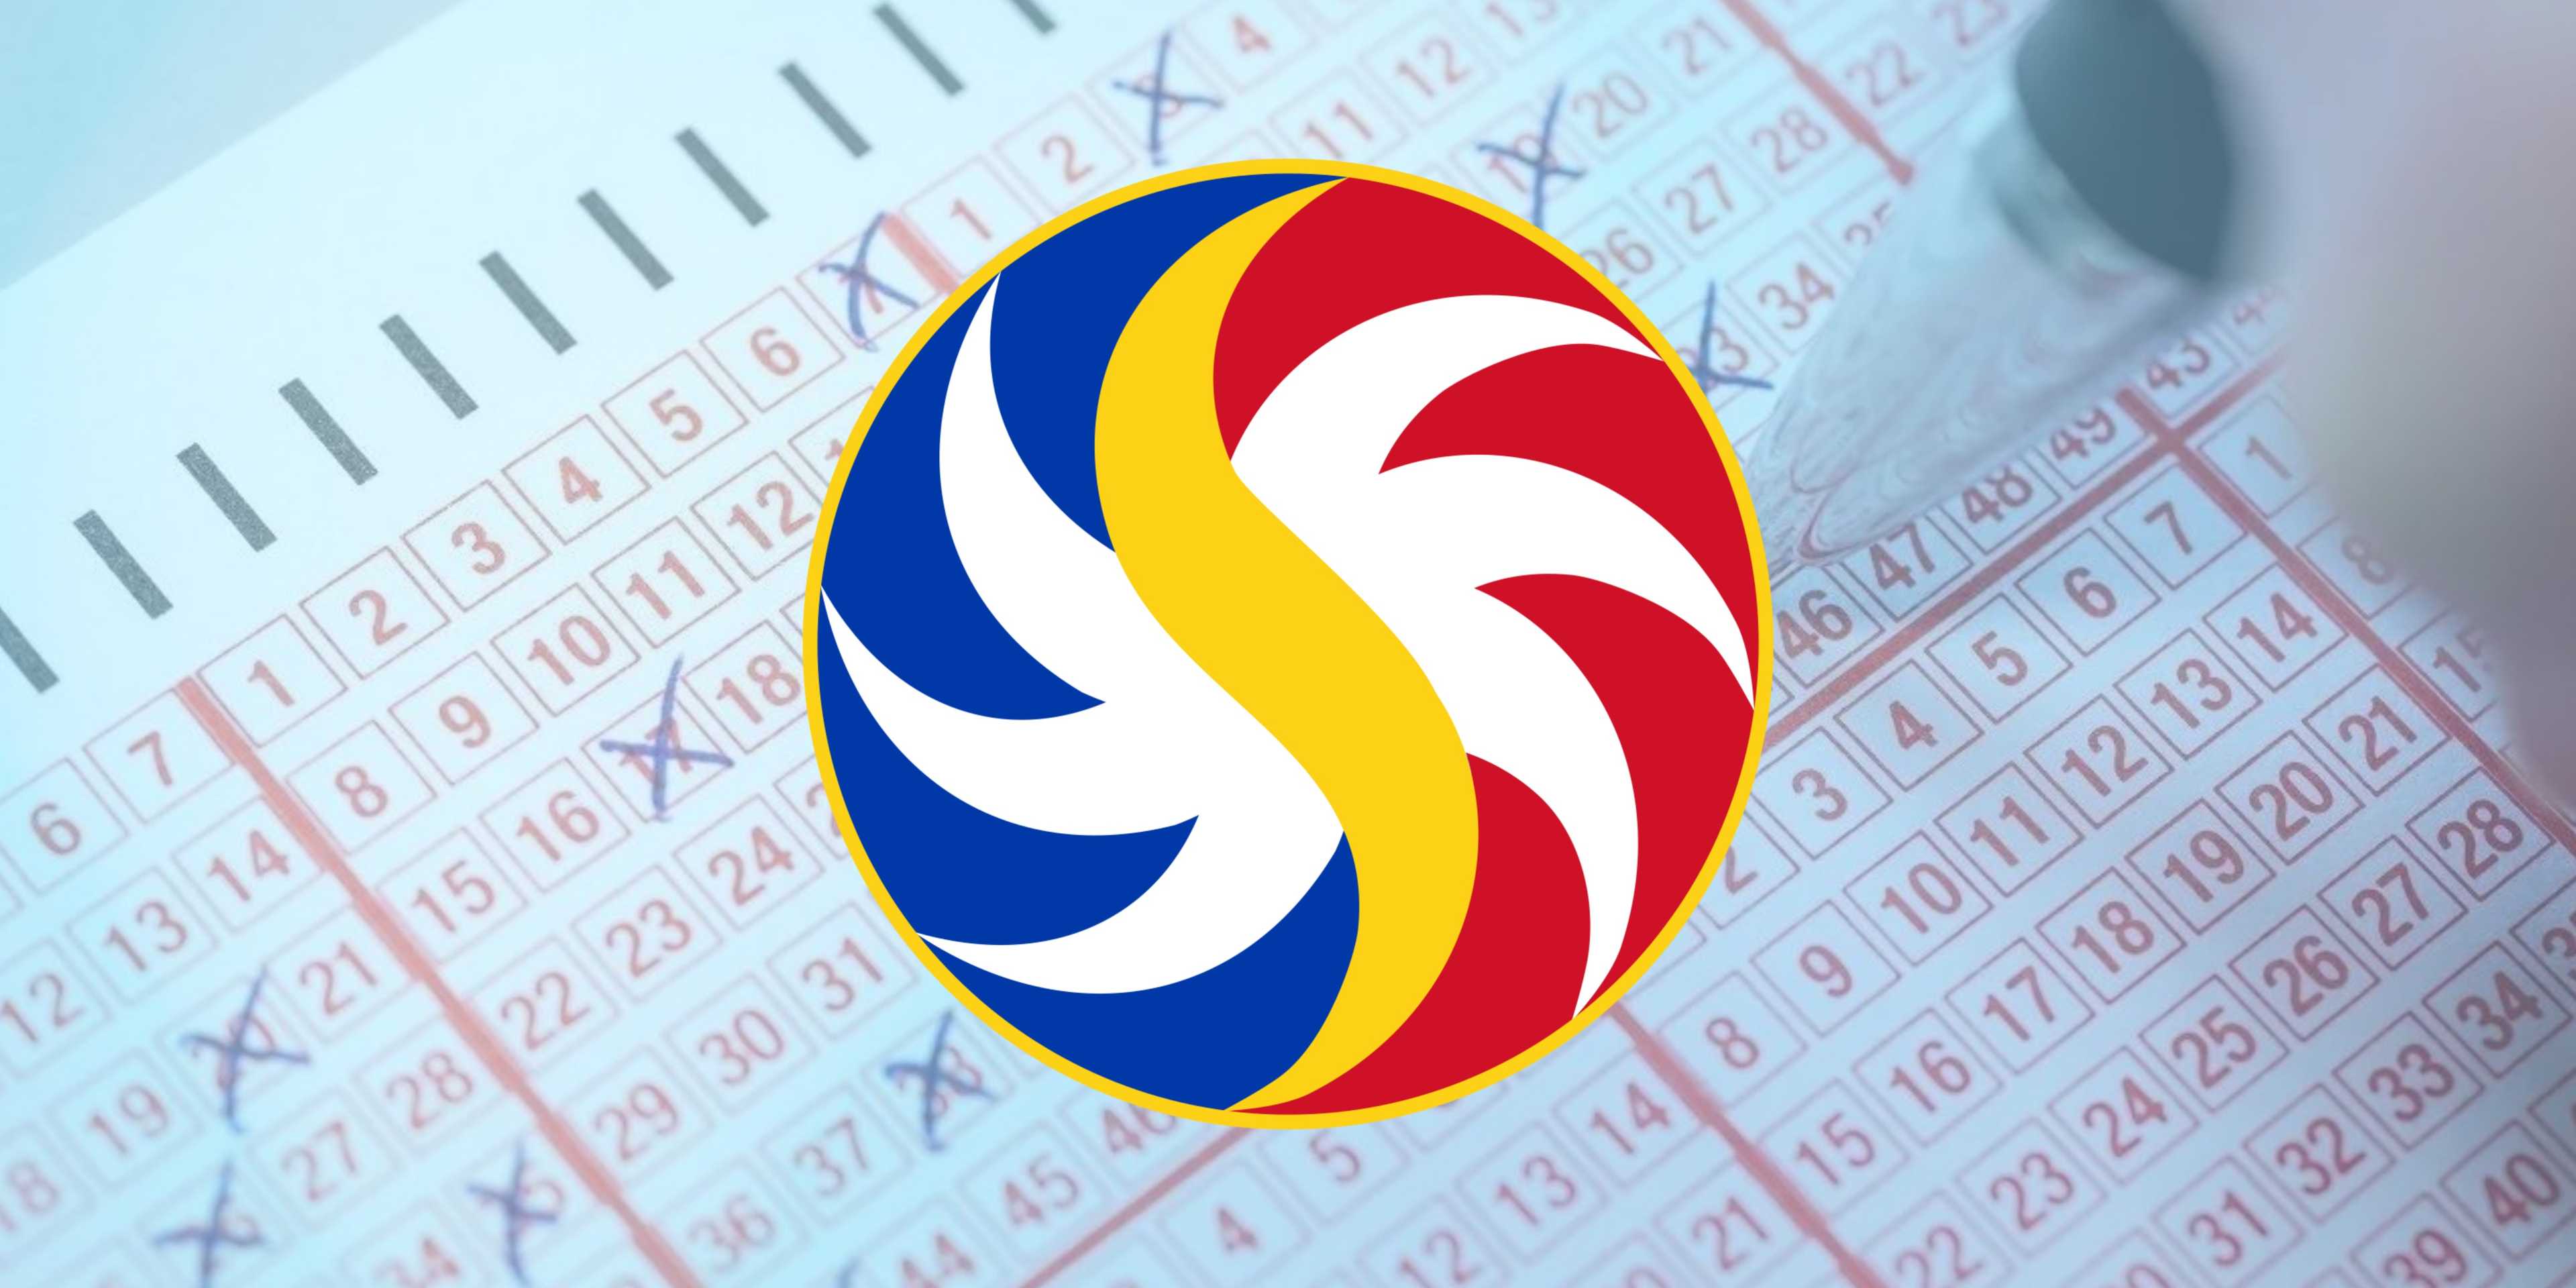 PCSO Lotto Draw Results on Monday, January 29